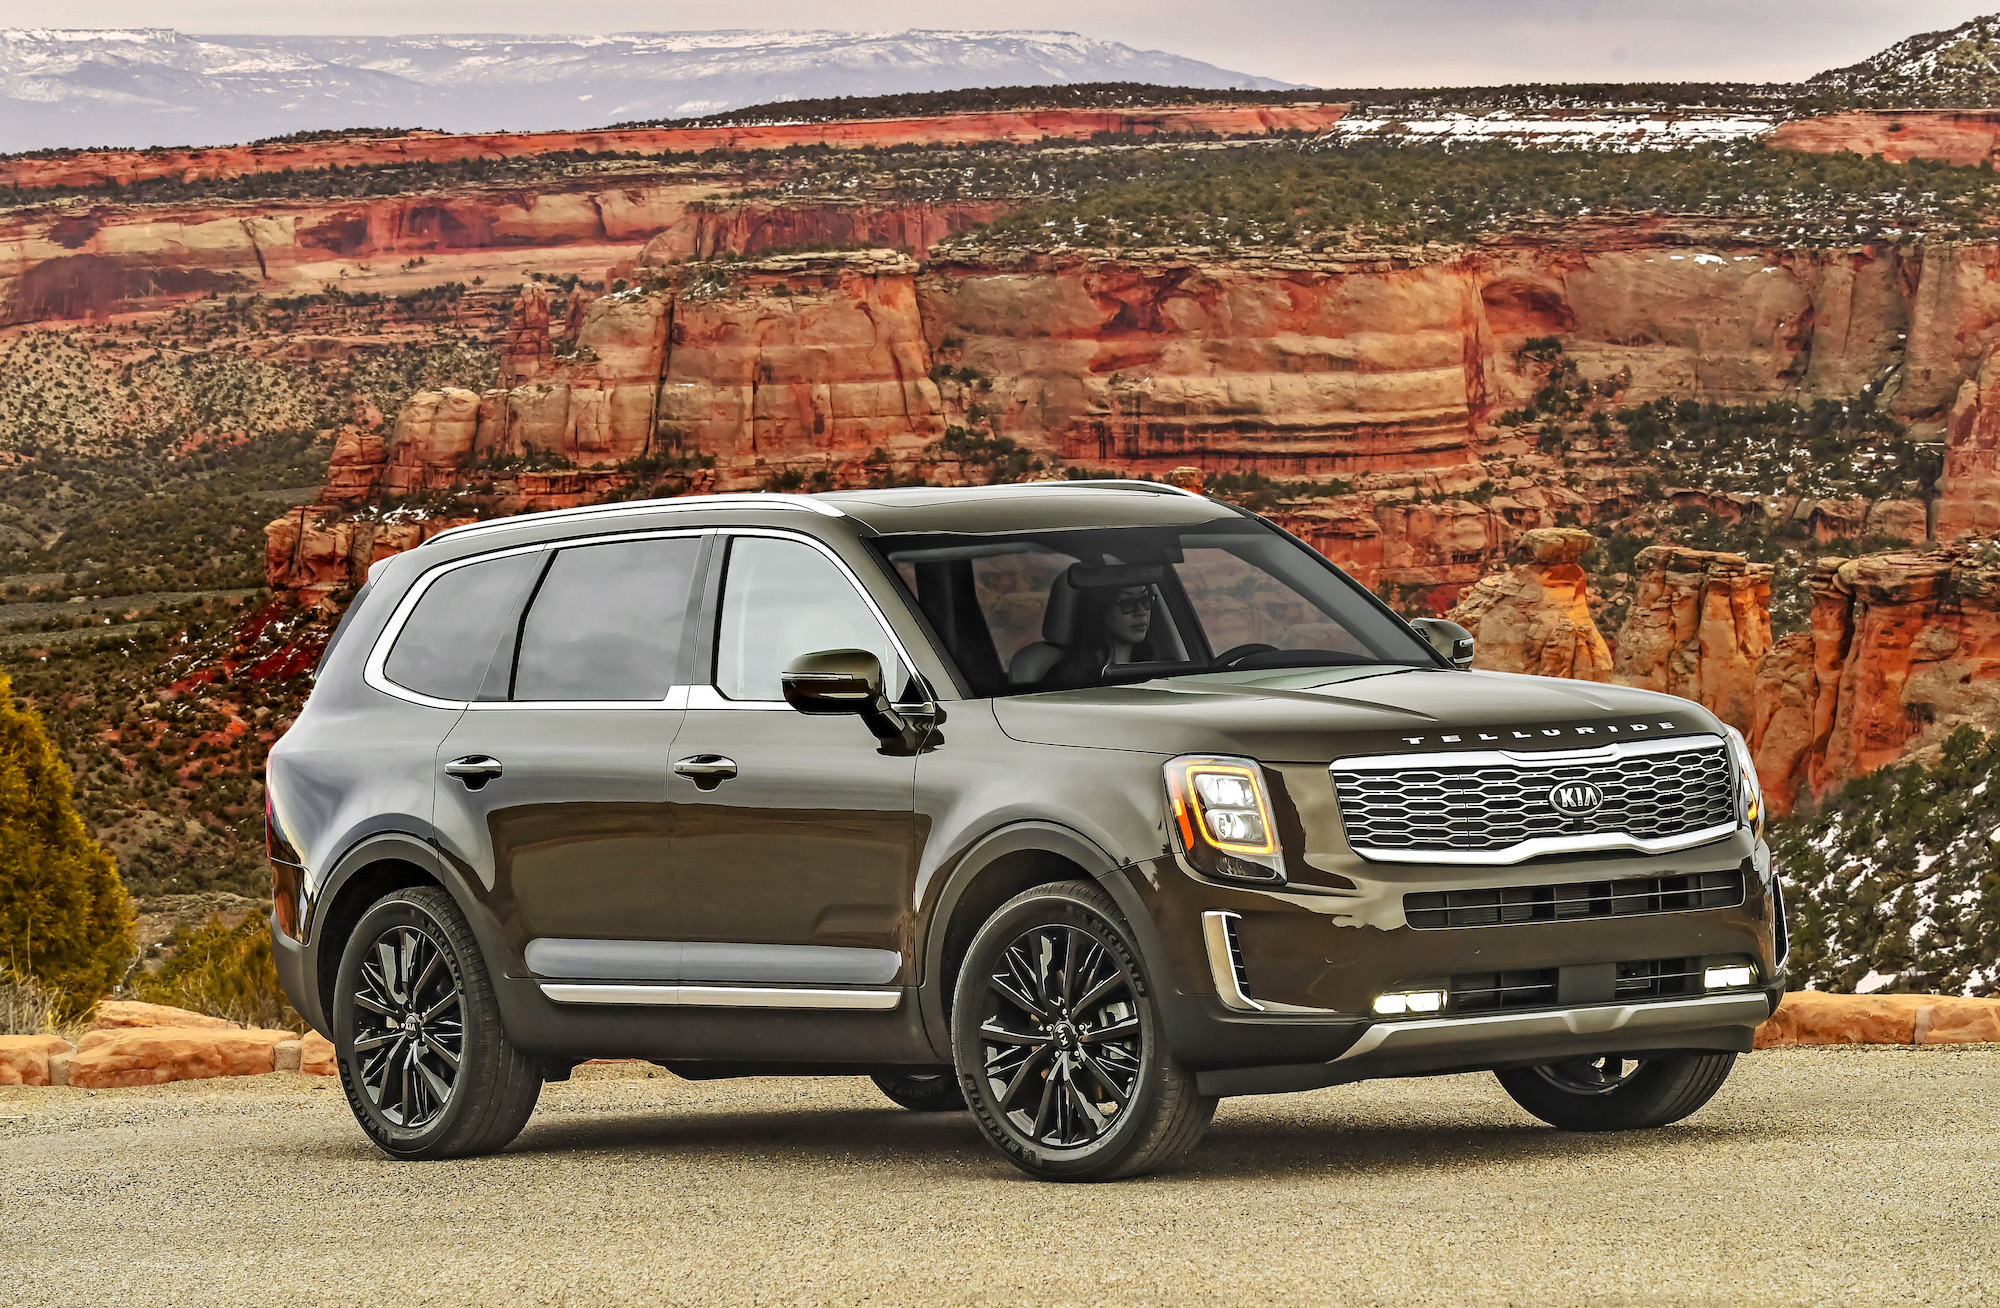 A dark-green 2020 Kia Telluride midsize crossover SUV parked in front of a red butte and mountains